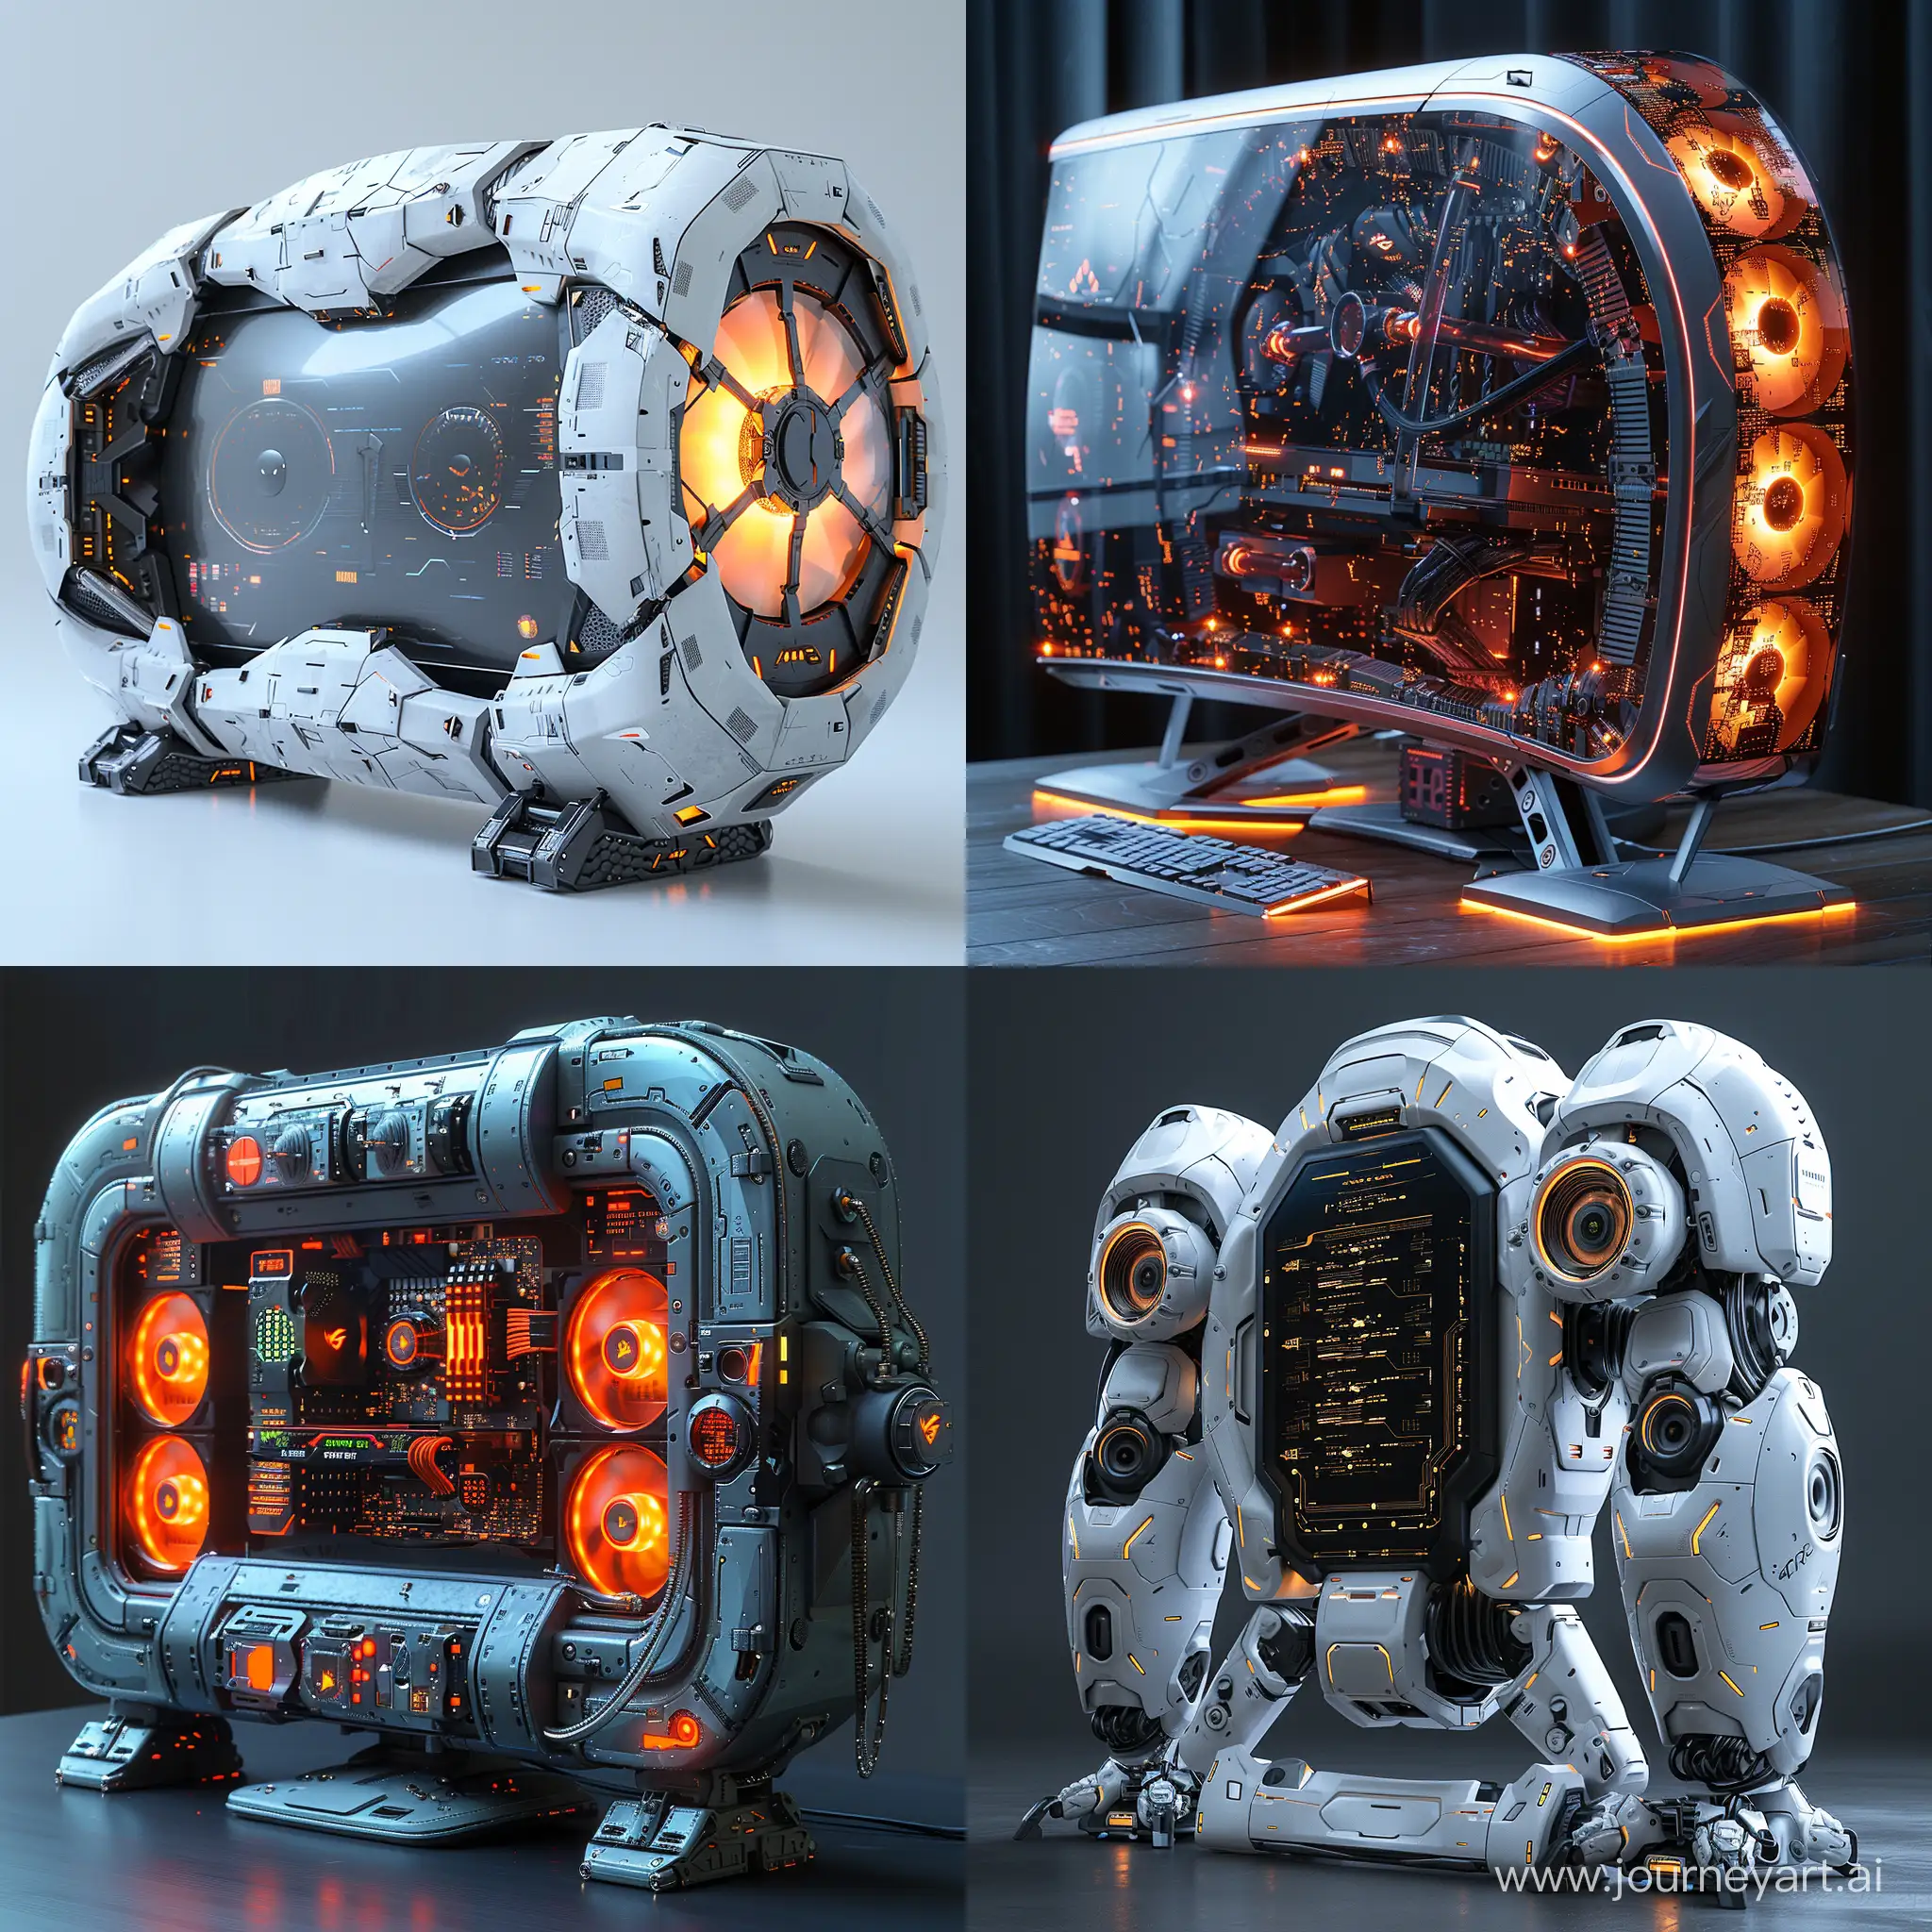 Futuristic sci-fi high-tech PC monitor, extremely lightweight and durable materials, octane render --stylize 1000